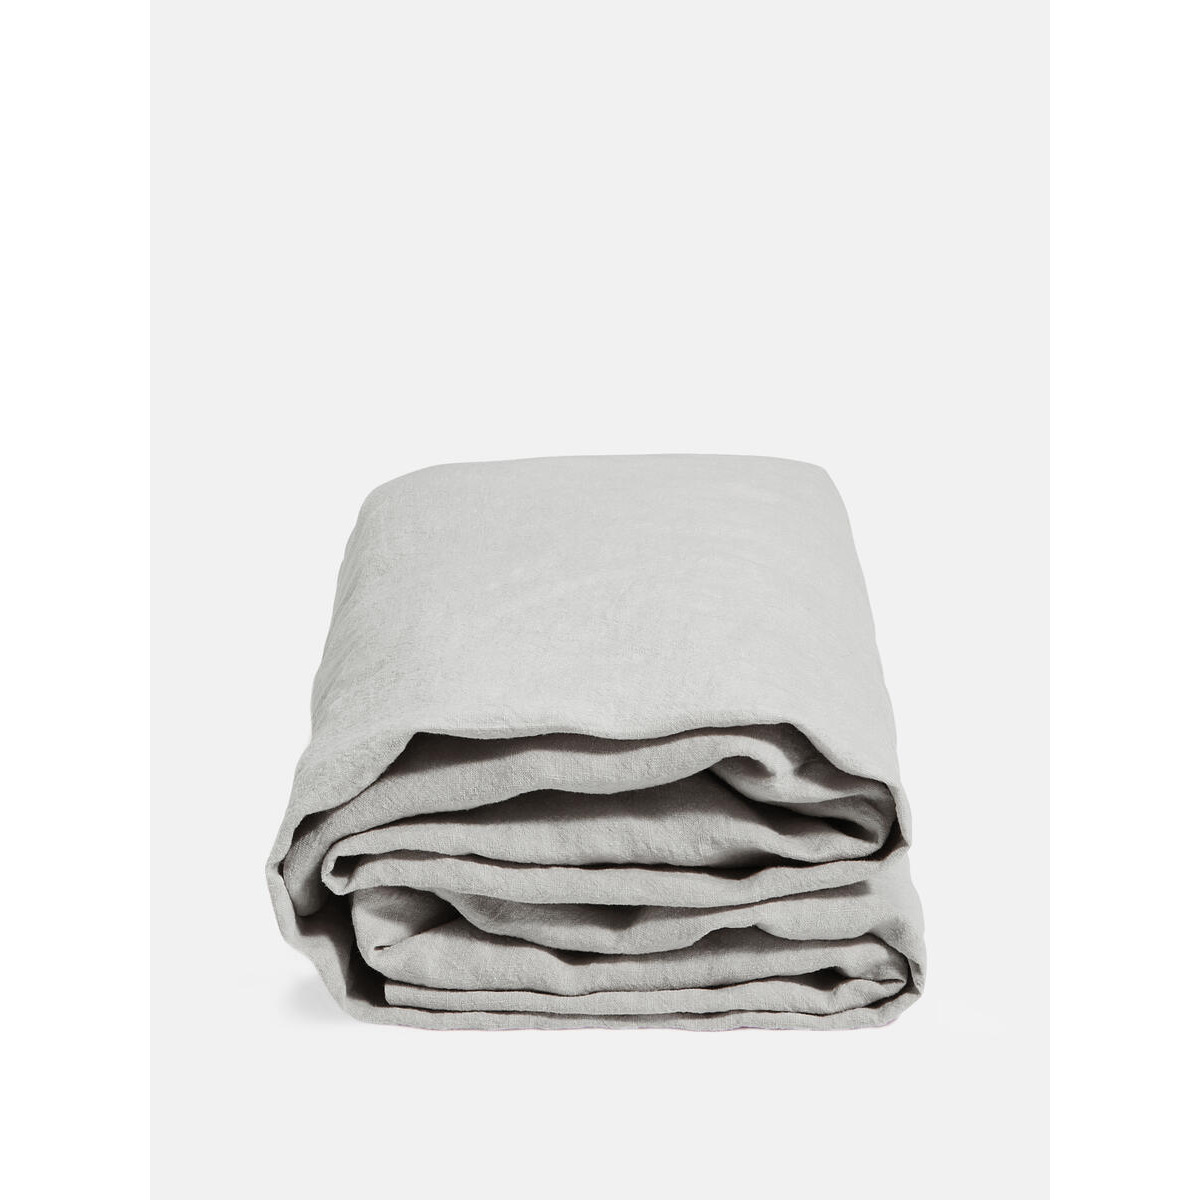 Luna Linen Double Fitted Sheet in Light Grey - Breathable and Durable